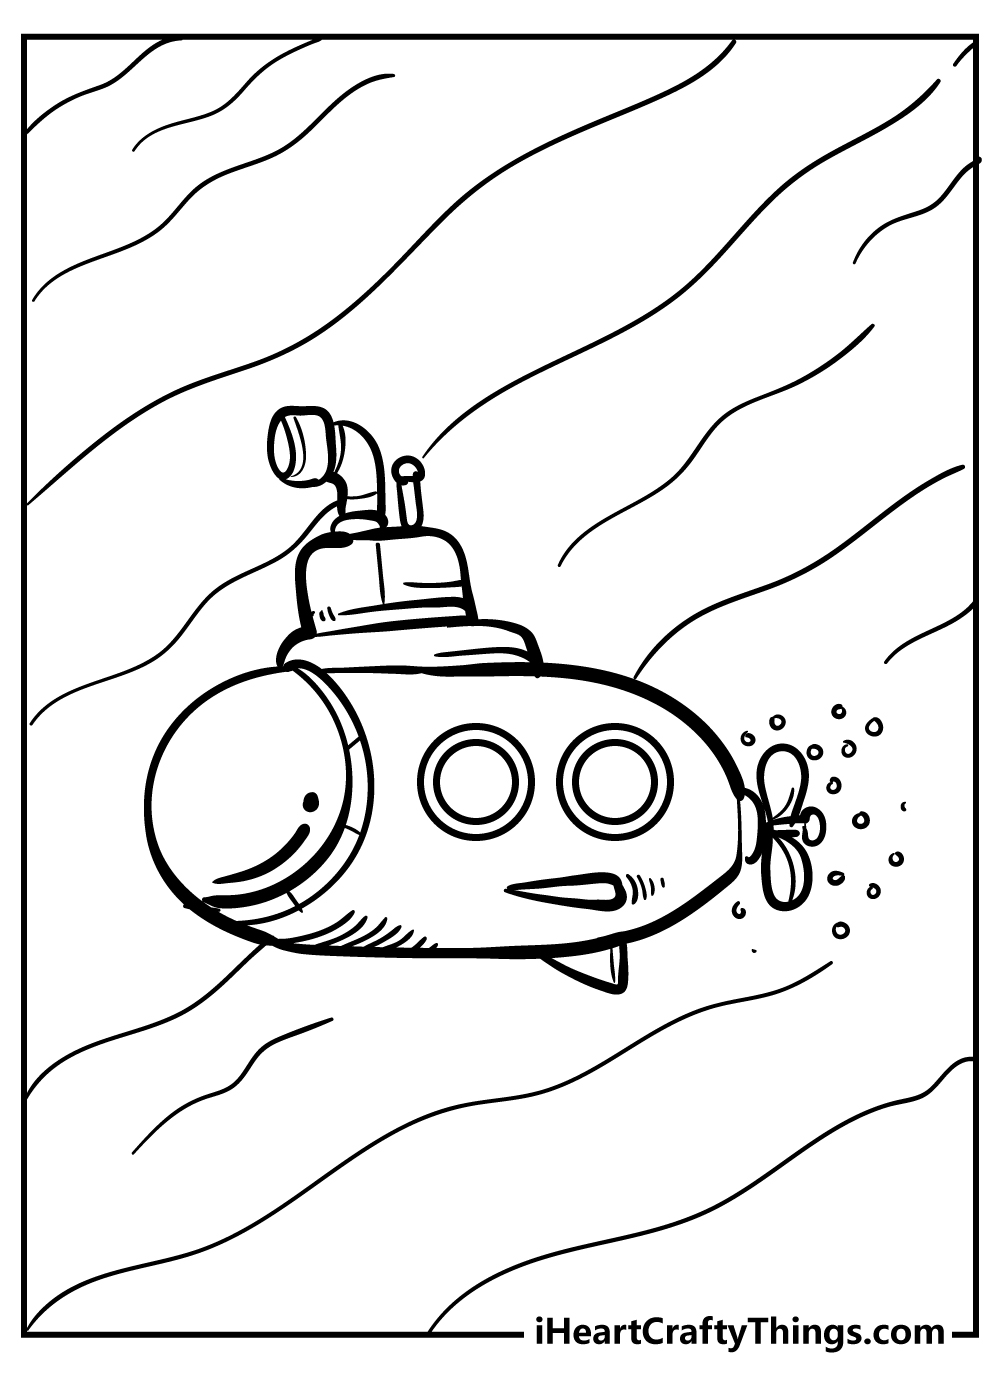 Submarine Easy Coloring Pages